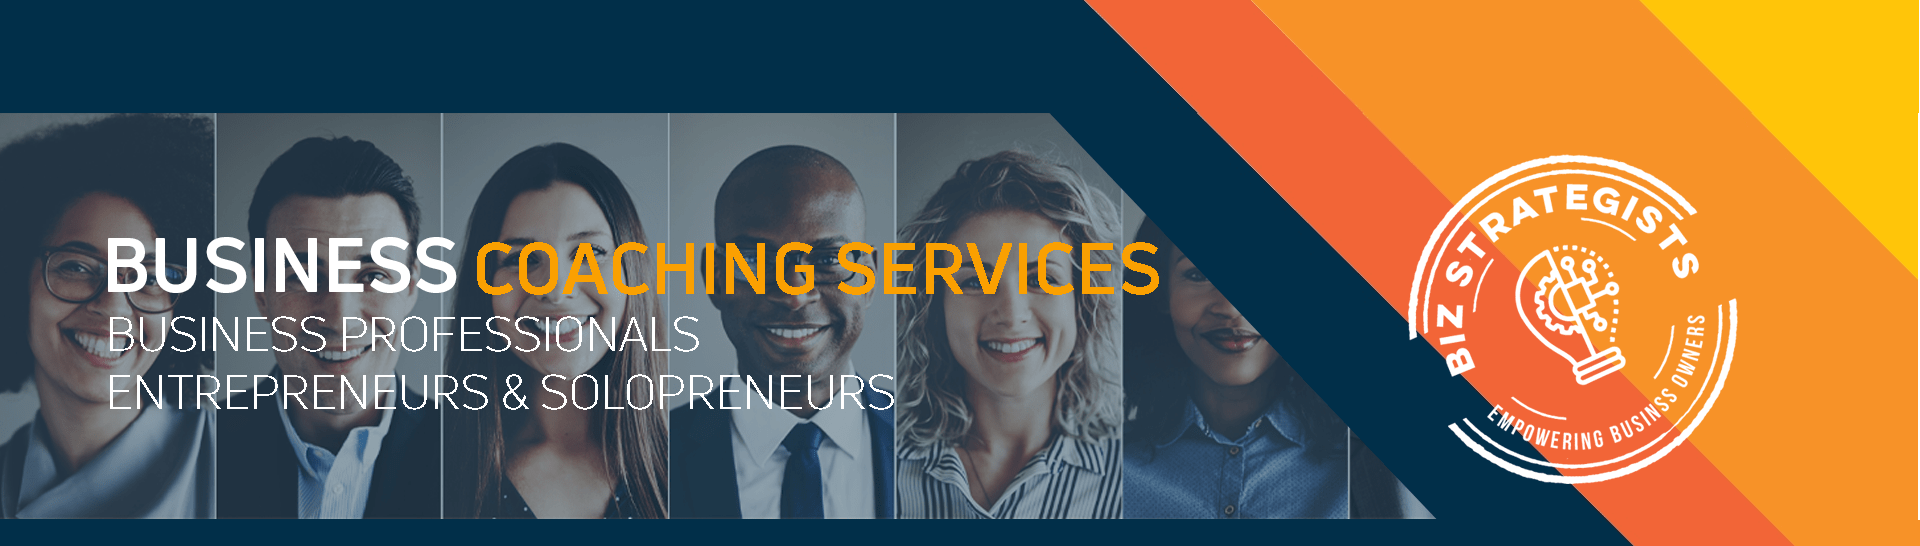 Expert Business Coaching Services